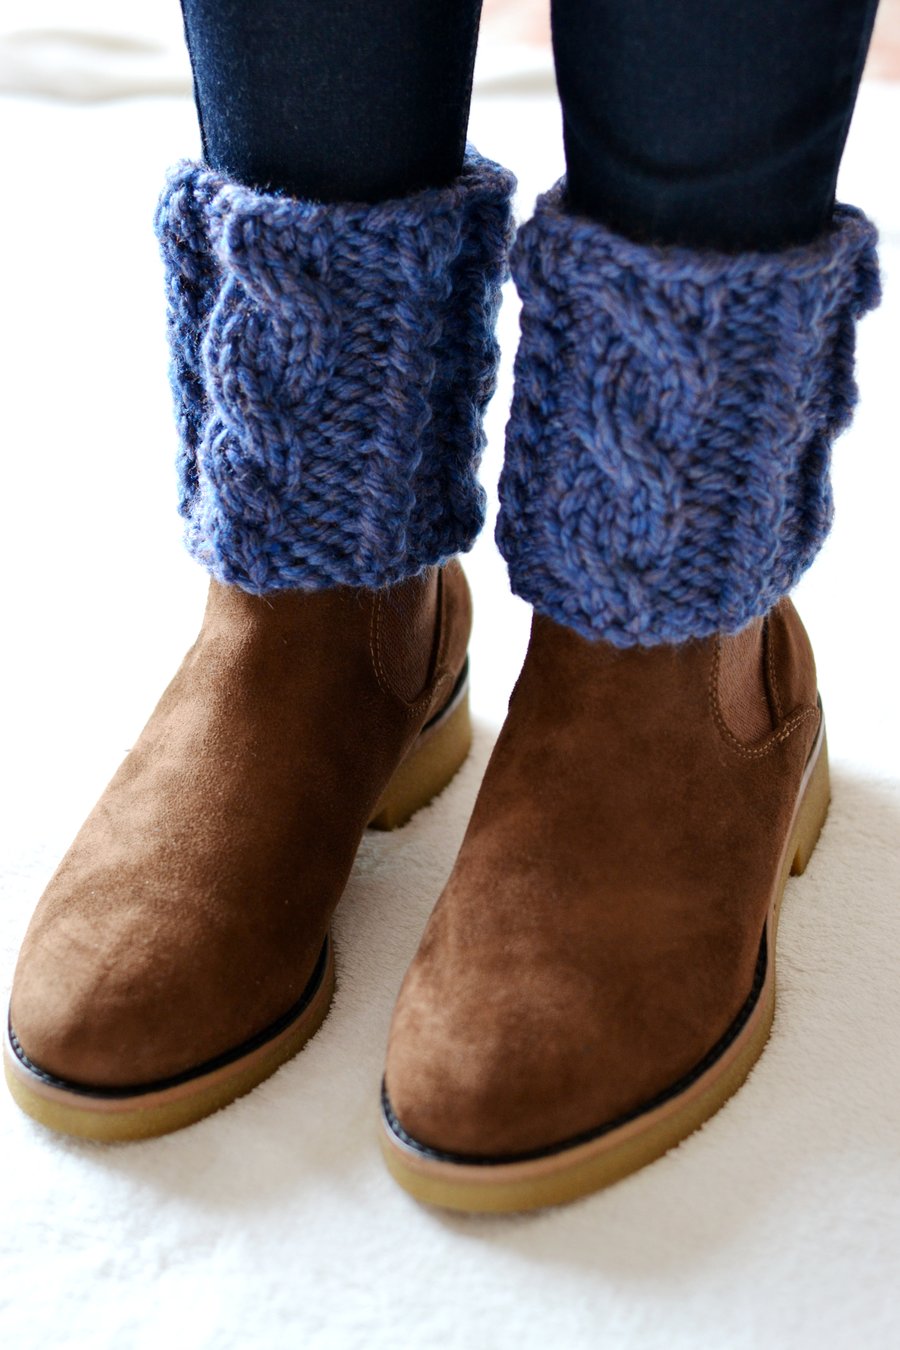 Boot Toppers  Super Chunky Knitted Boot Cuffs, 